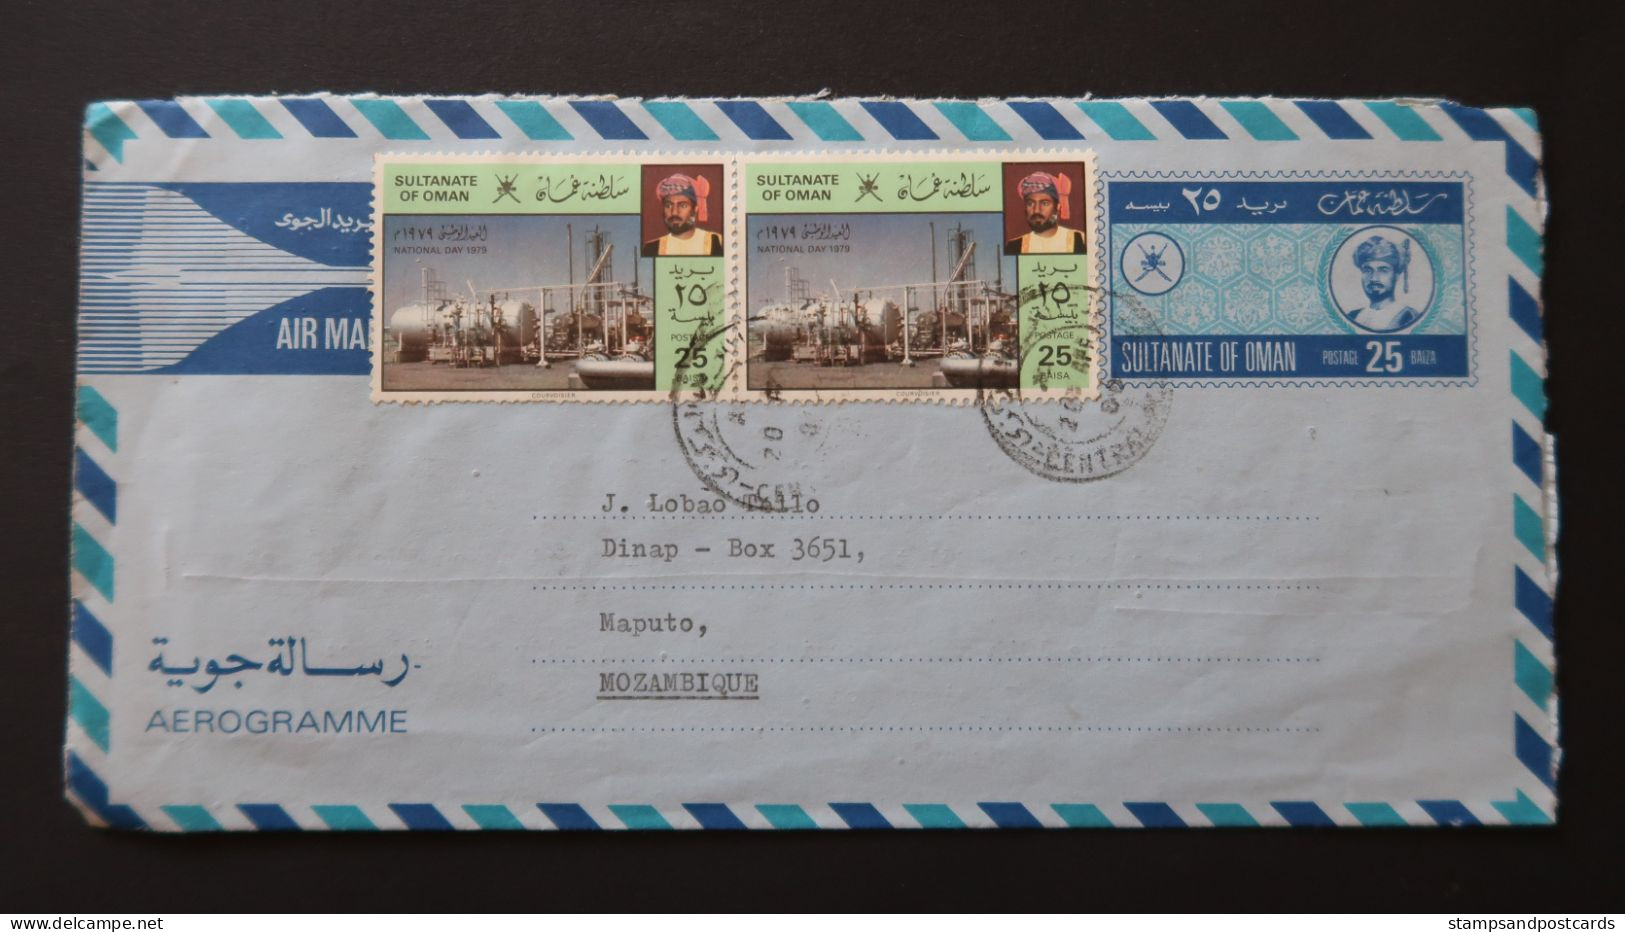 Oman Entier Postal Aerogramme Voyagé Au Mozambique 1980 Sultanate Of Oman Air Letter Stationery Postally Used - Omán